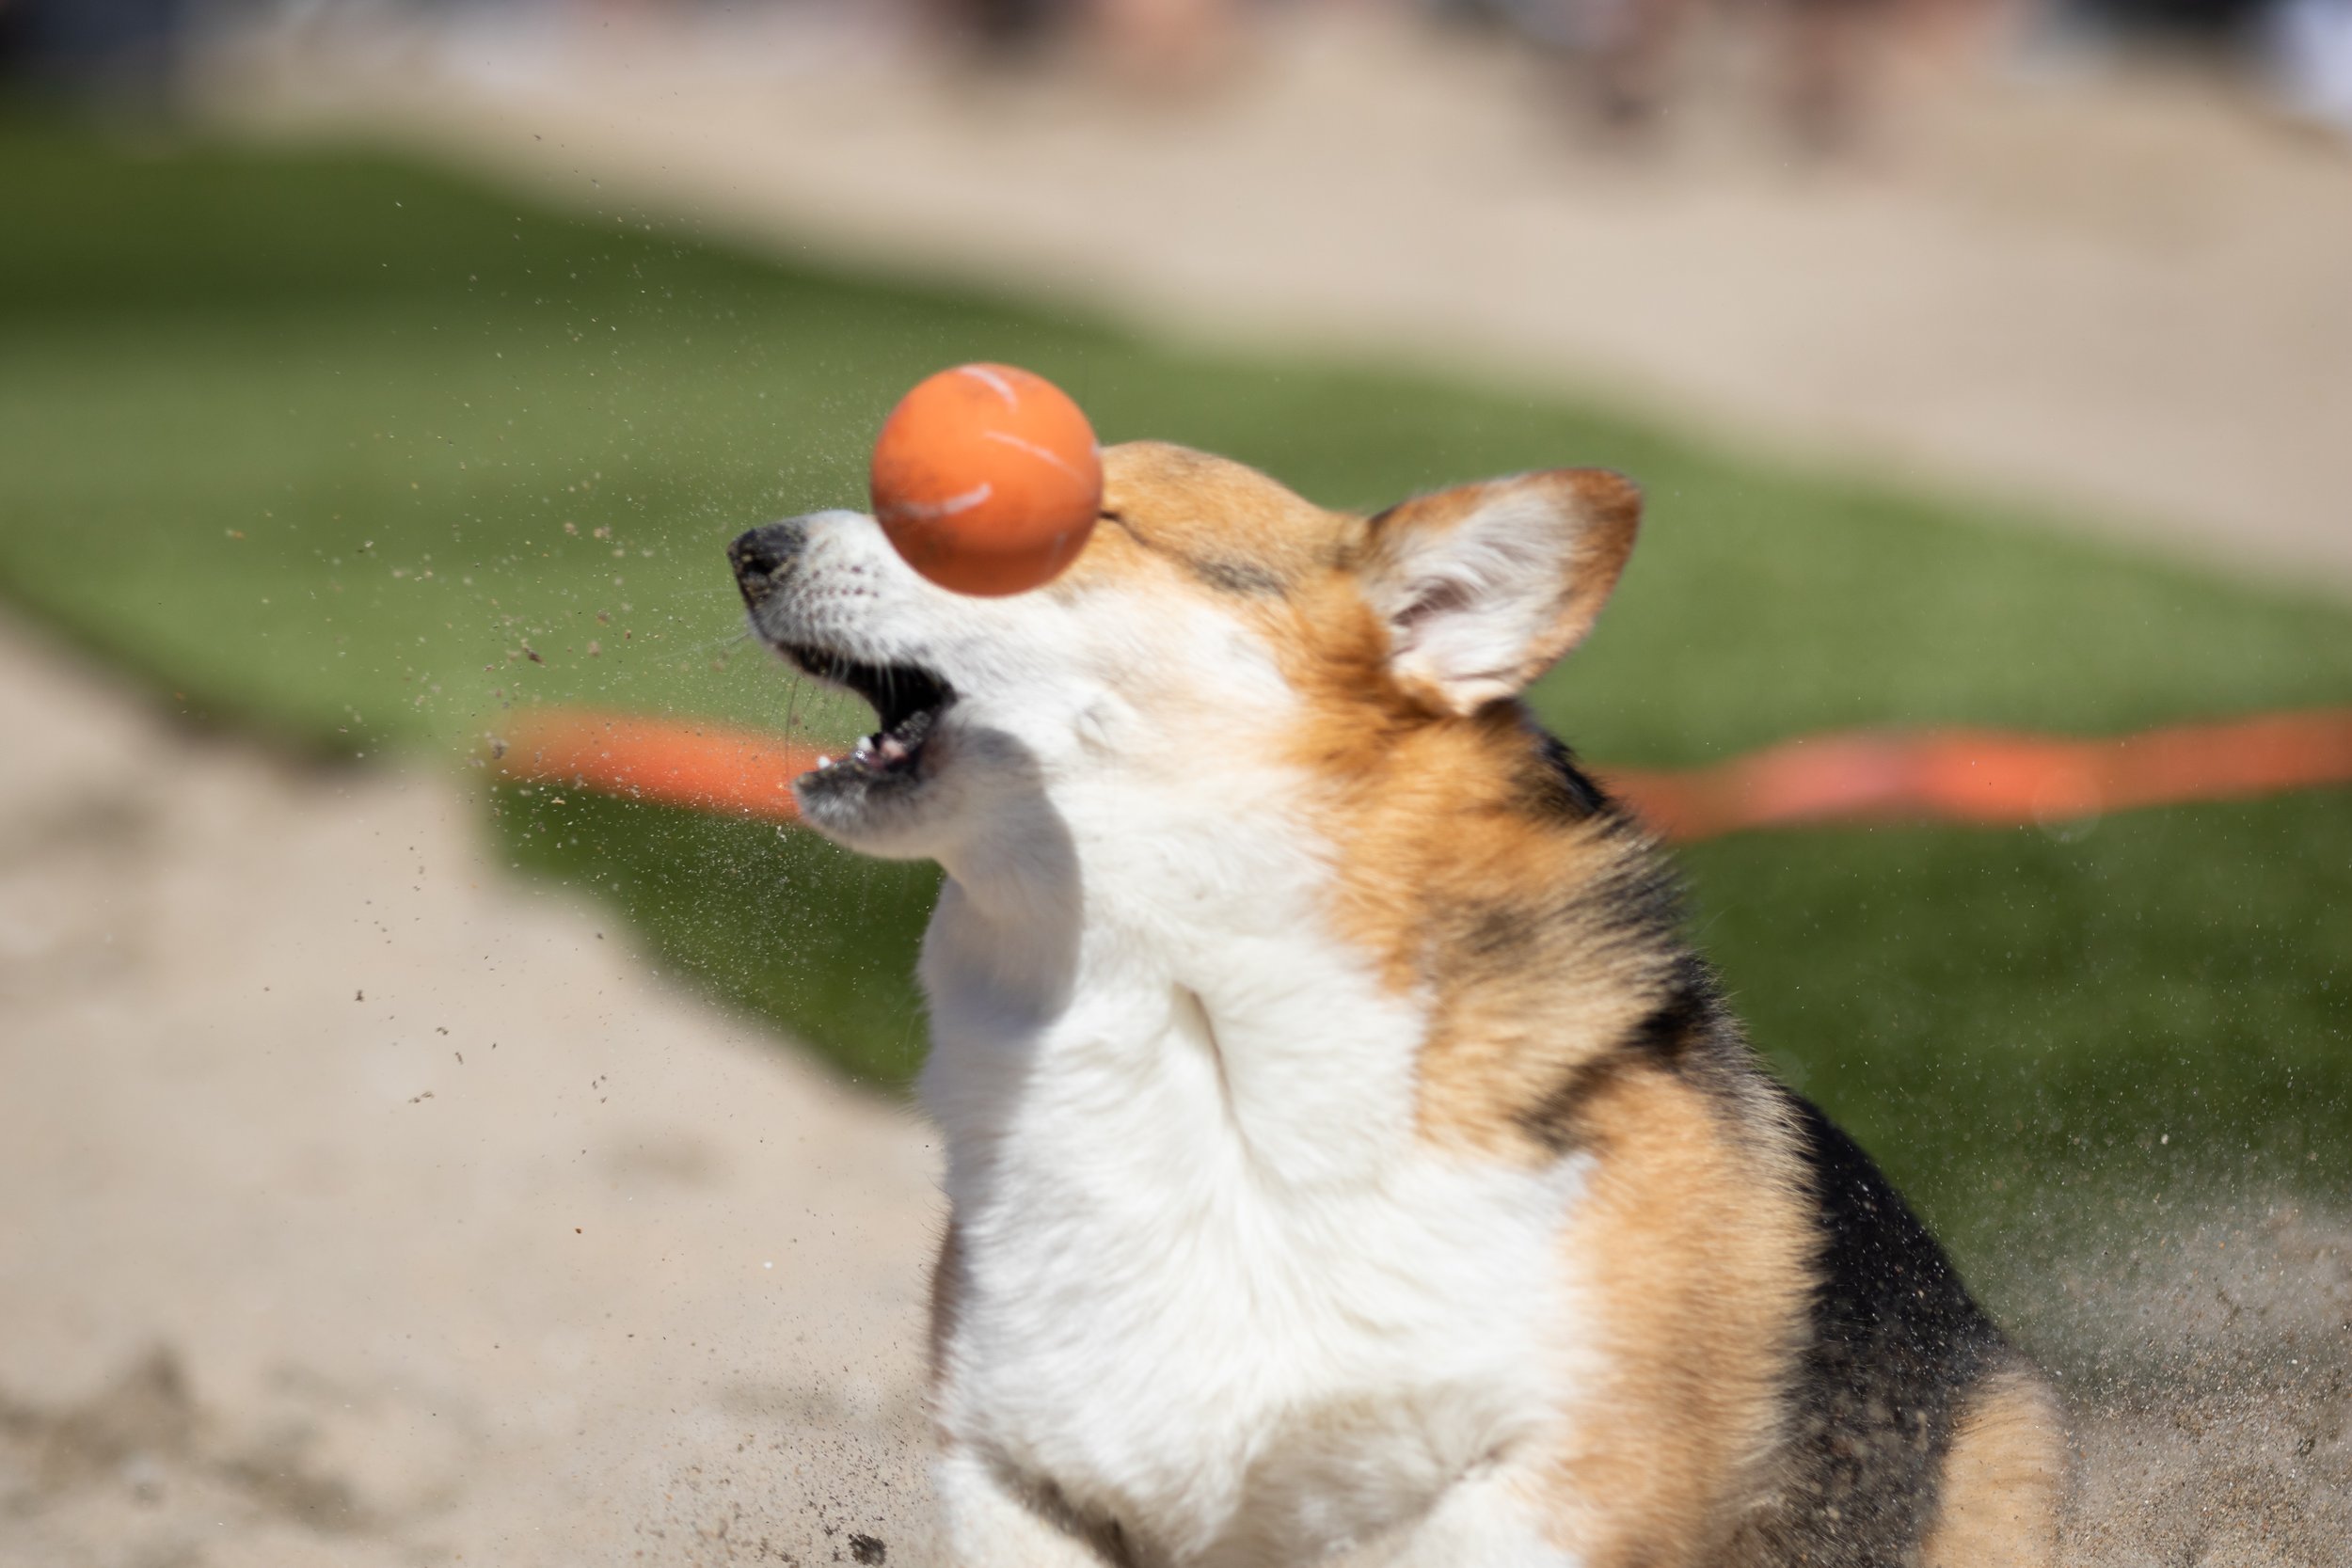  The first contestant attempting to catch a ball and scoring a point in the Fetch Fanatic Contest during Corgi Beach Day at Huntington Dog Beach, Huntington Beach, Calif., on Saturday, April 1, 2023. They ended up in tied second place, with five ball